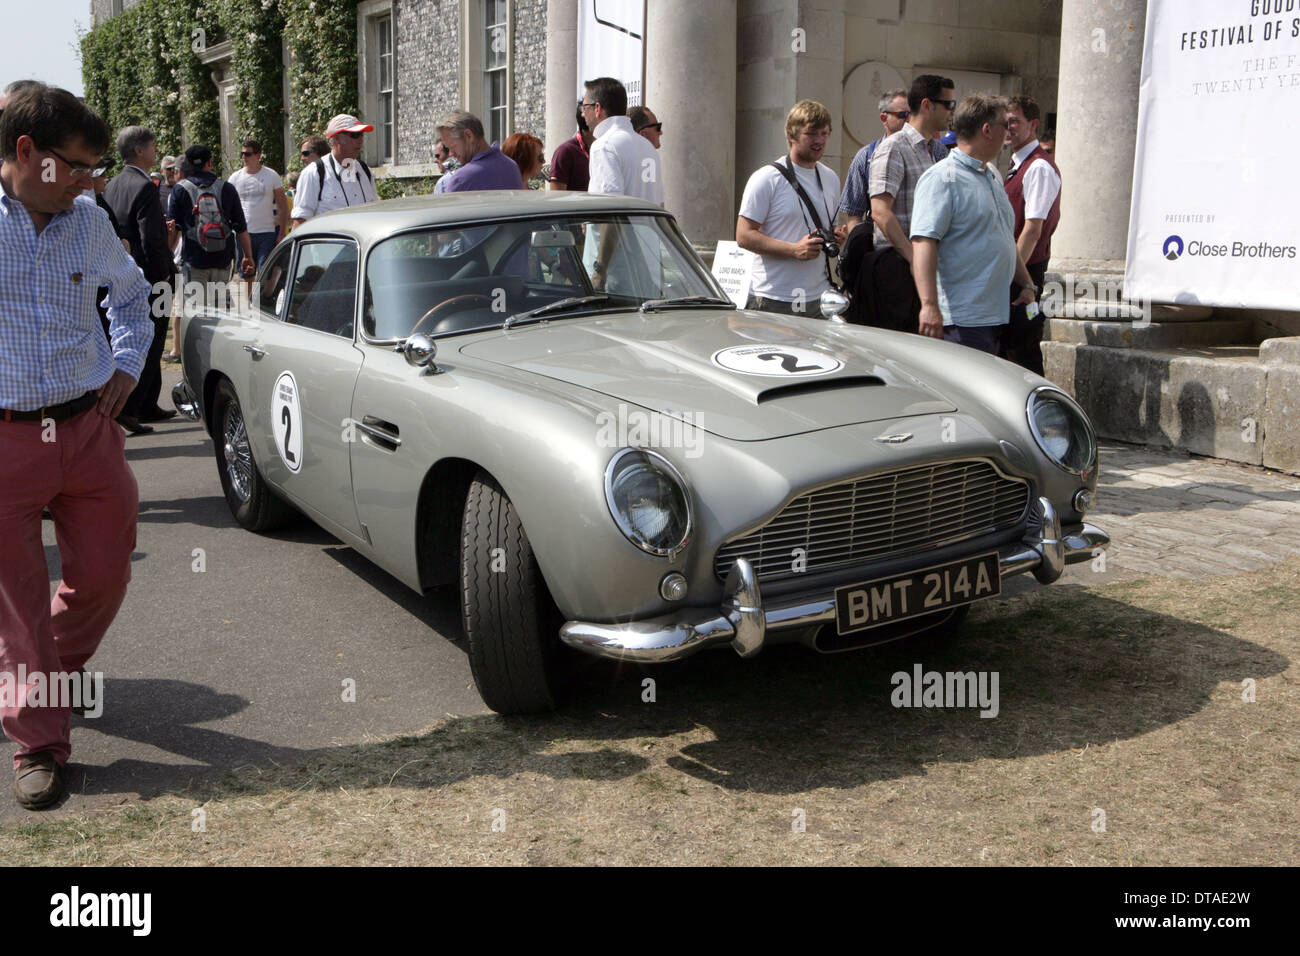 The 007 James Bond  1963 Aston Martin DB5 draws attention at Goodwood Festival of Speed 2013. Stock Photo